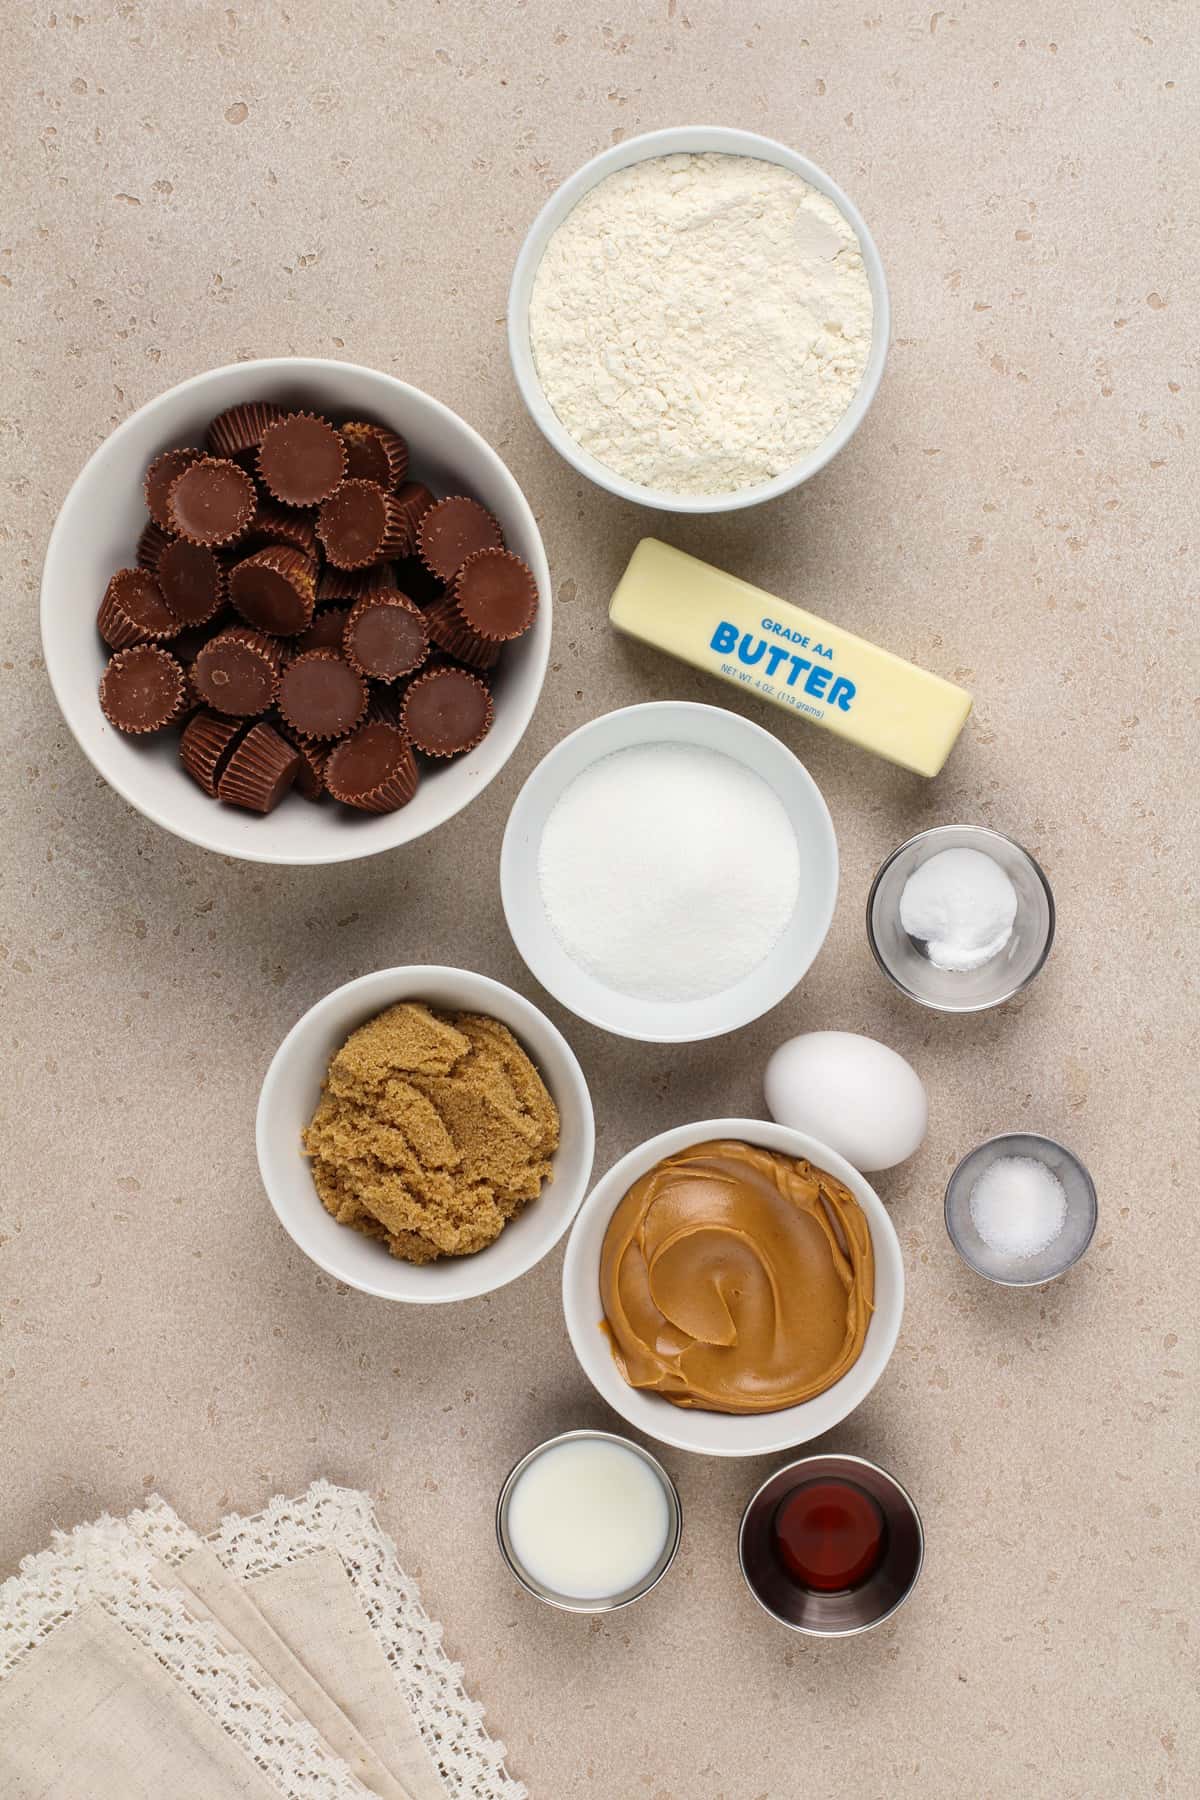 Peanut butter cup cookie ingredients arranged on a beige countertop.